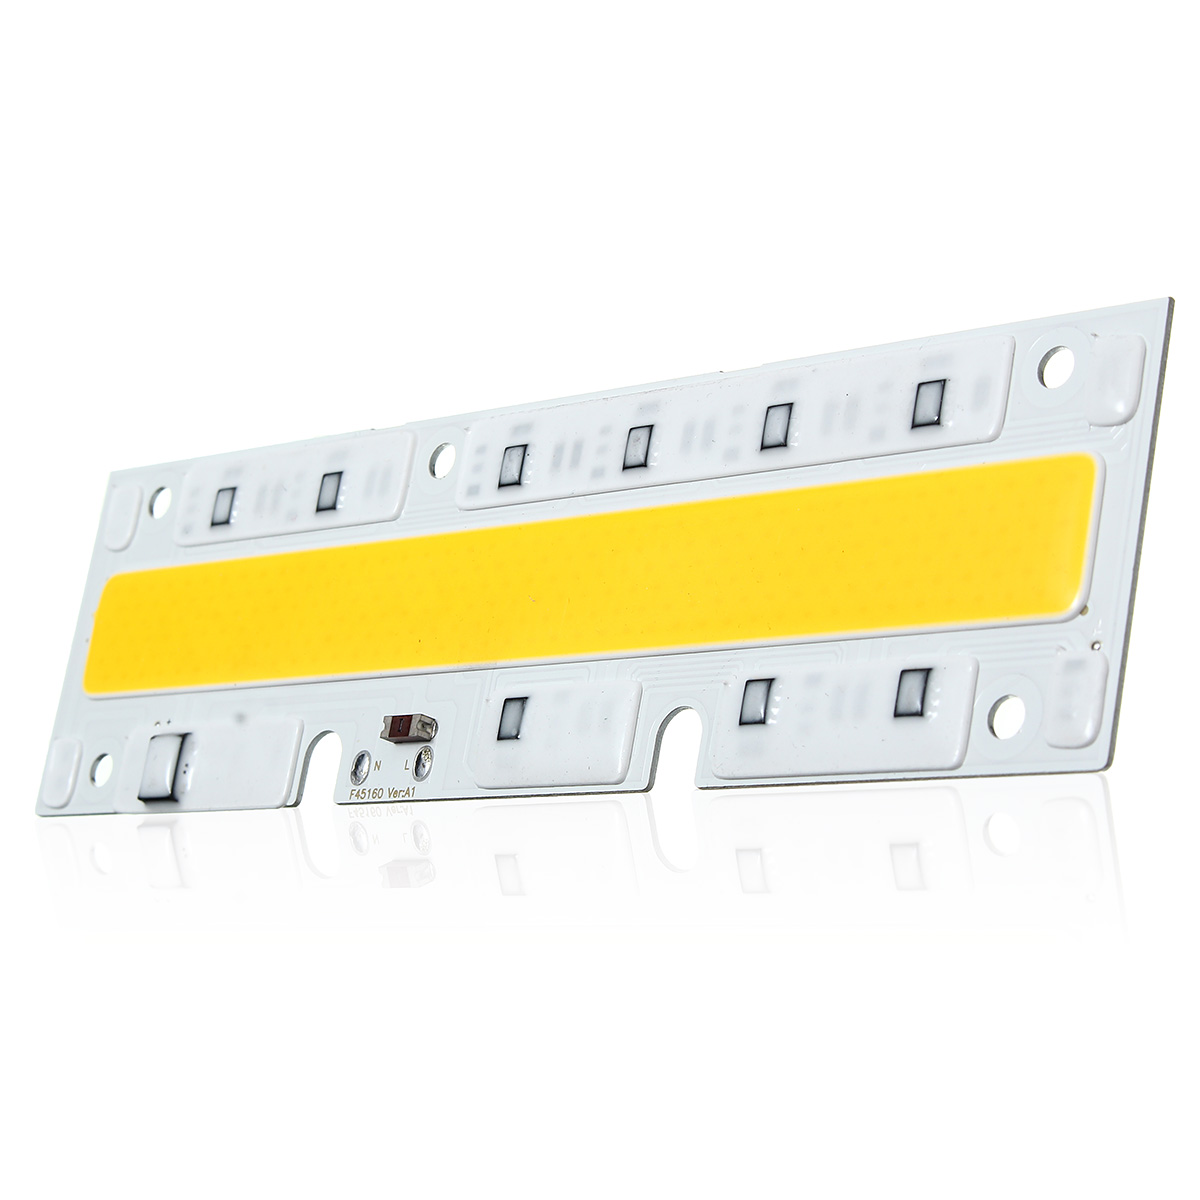 Find 1X 5X 10X 100W 7400LM Warm/White 45 X 160MM DIY COB LED Chip Bulb Bead For Flood Light AC110/220V for Sale on Gipsybee.com with cryptocurrencies